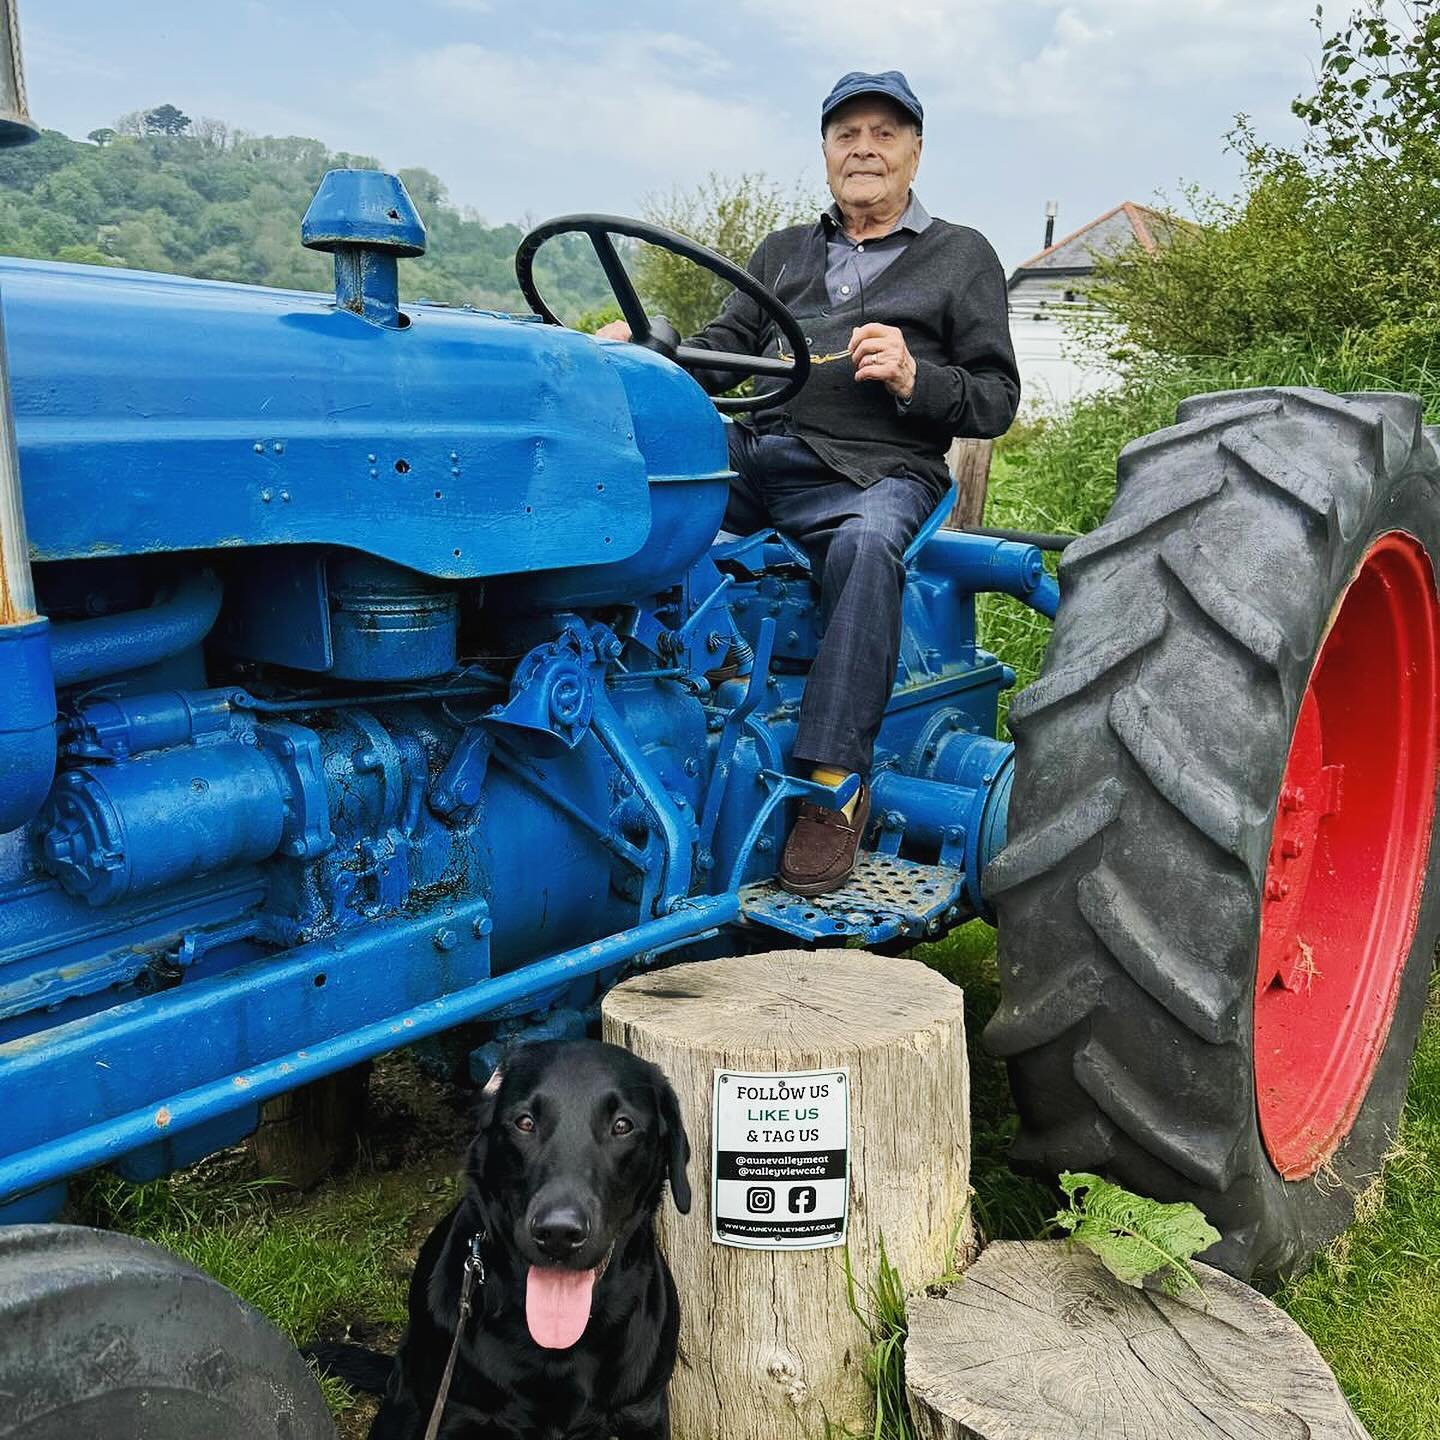 The boys day out went well by the looks of it! Papa C has found his new ride🚜😎
#ourlifeatthebarn #tractorlife #lovetractors #weekendmood #boysdayout